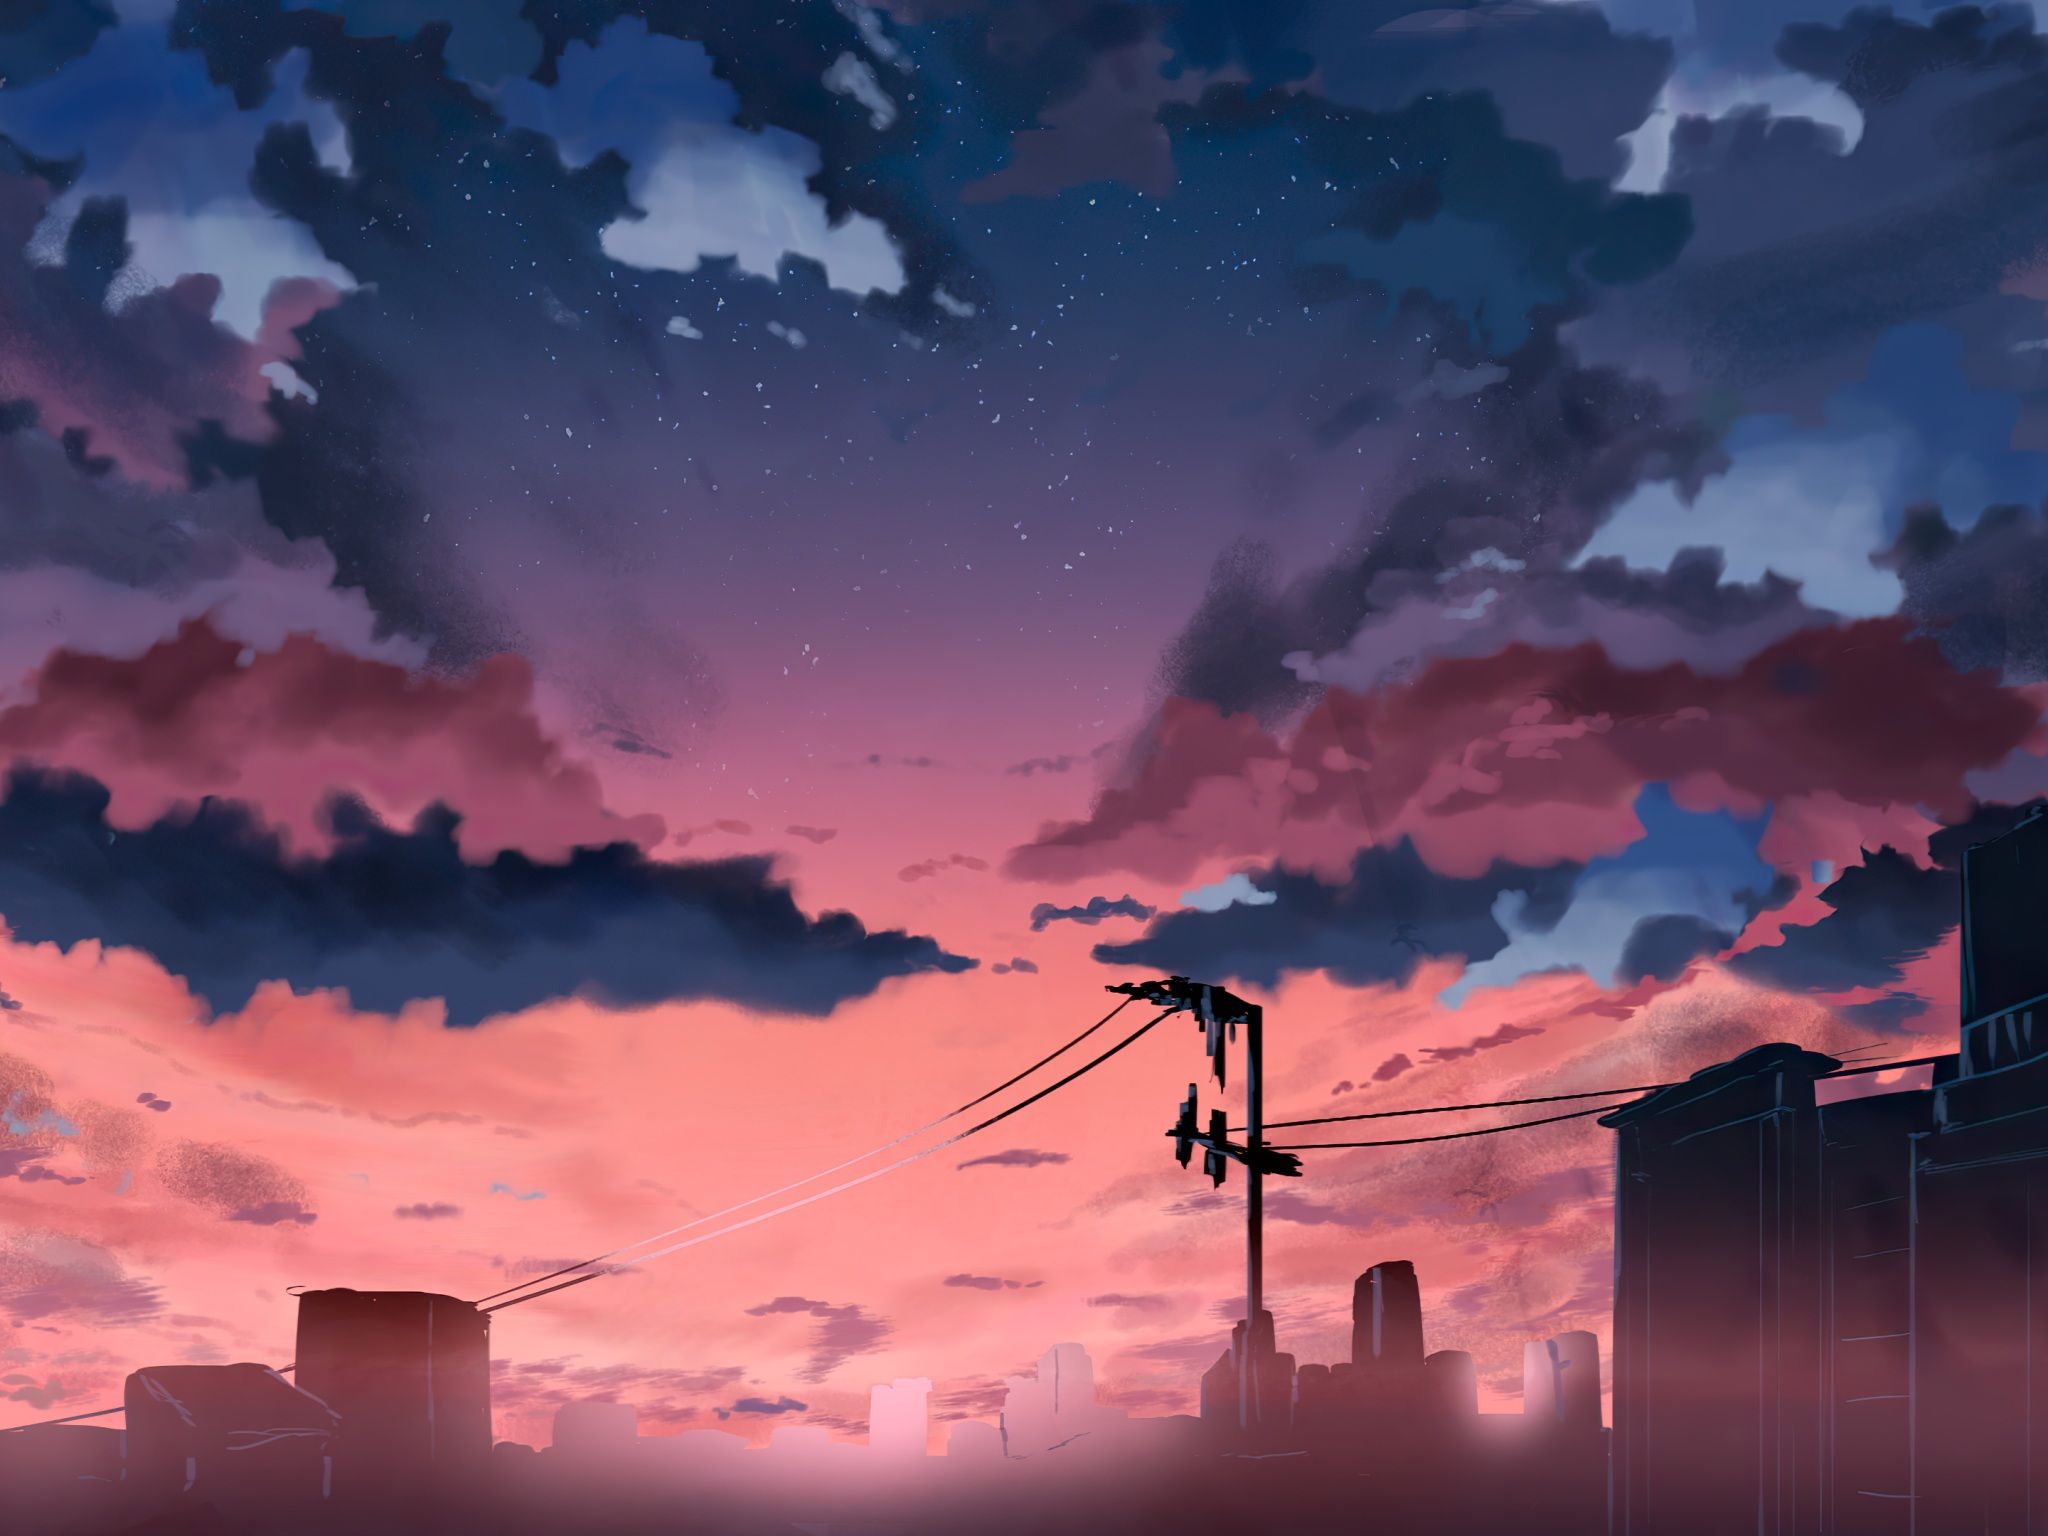 1920x1200 anime, 5 Centimeters Per Second, city, sunset, power lines, clouds, buildings, pink, purple, blue, white, black - Anime sunset